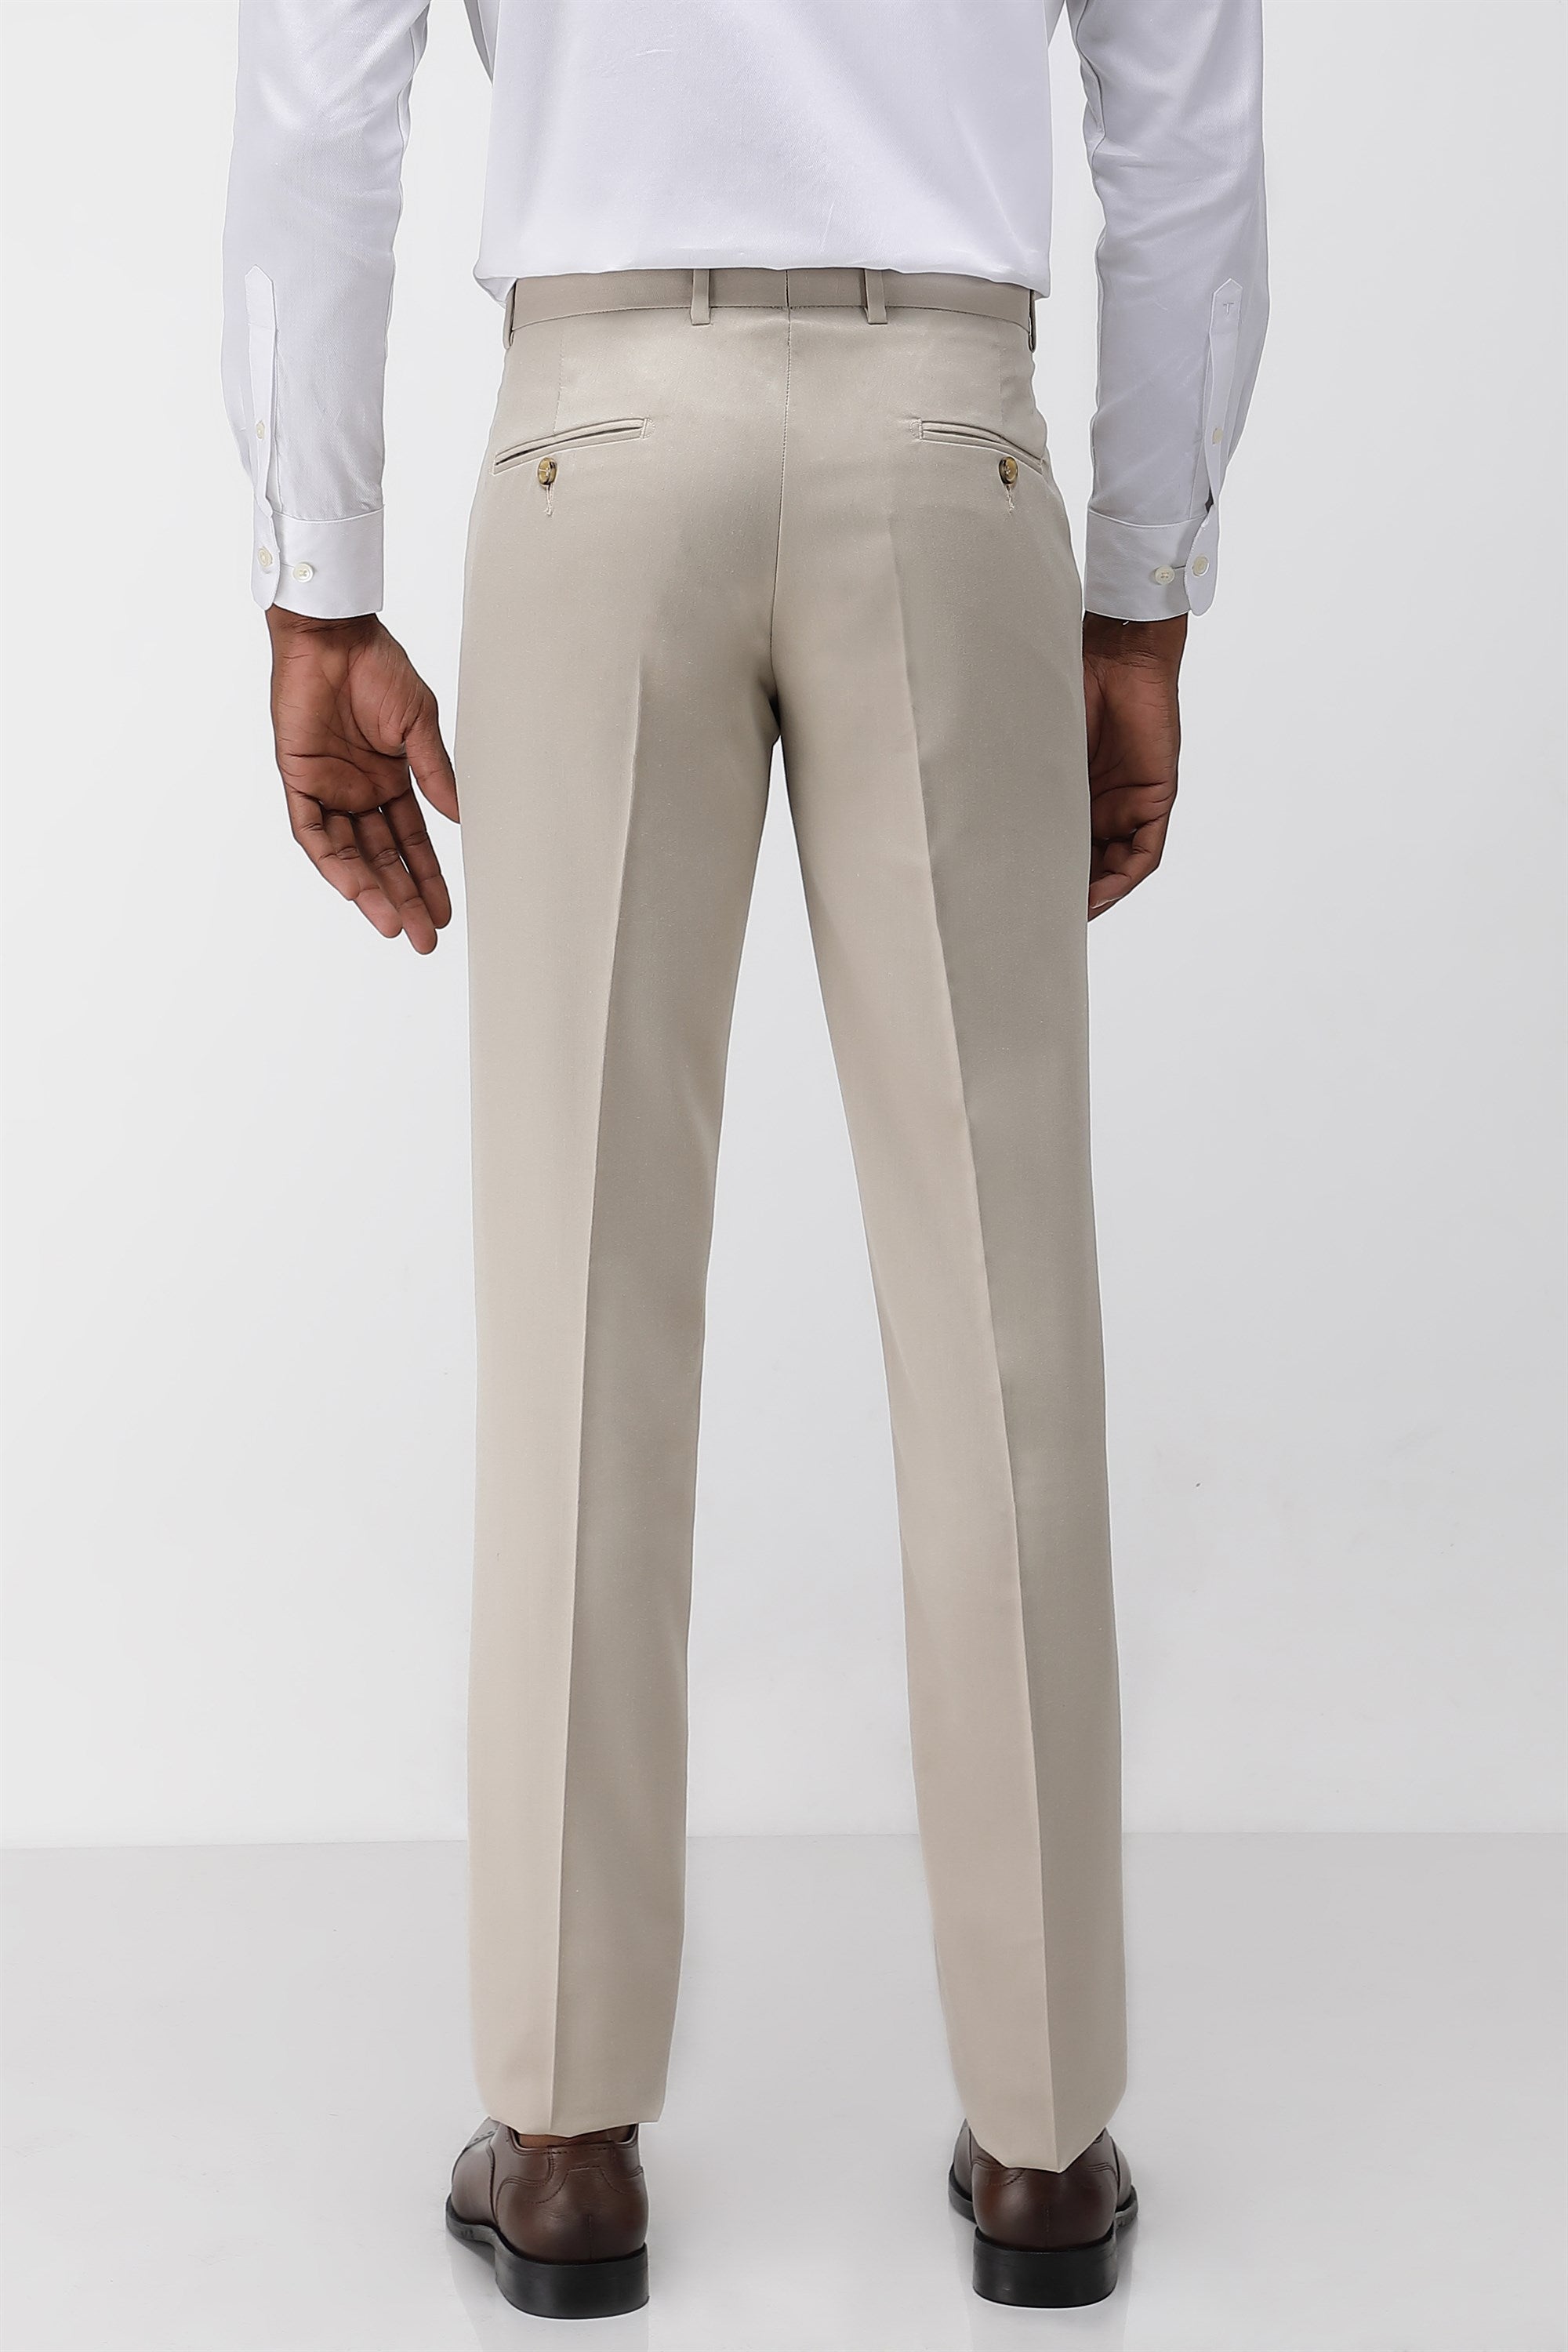 2023 Brand Clothing Men Spring High Quality Leisure Suit Trousers/Male Slim  Fit All Match Formal